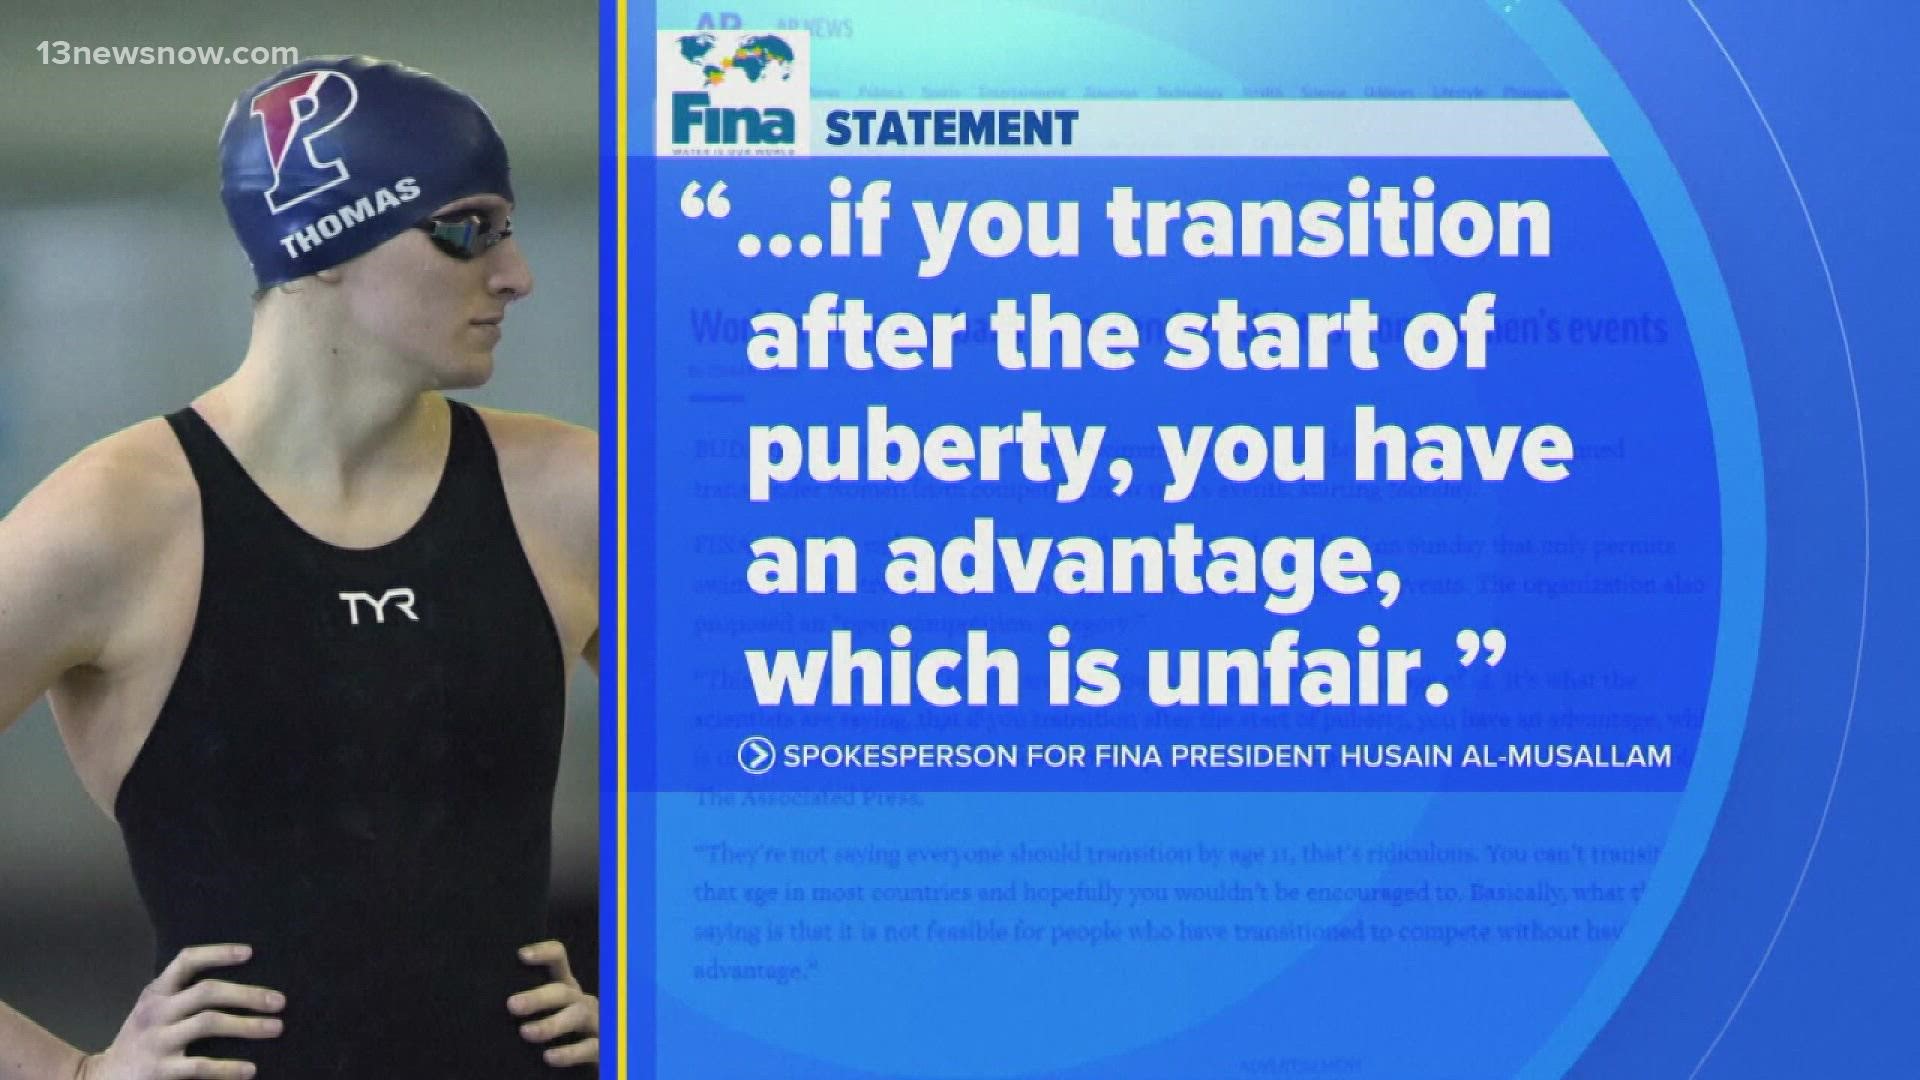 A new policy announced this morning effectively bans transgender women from competing in women's swimming events.